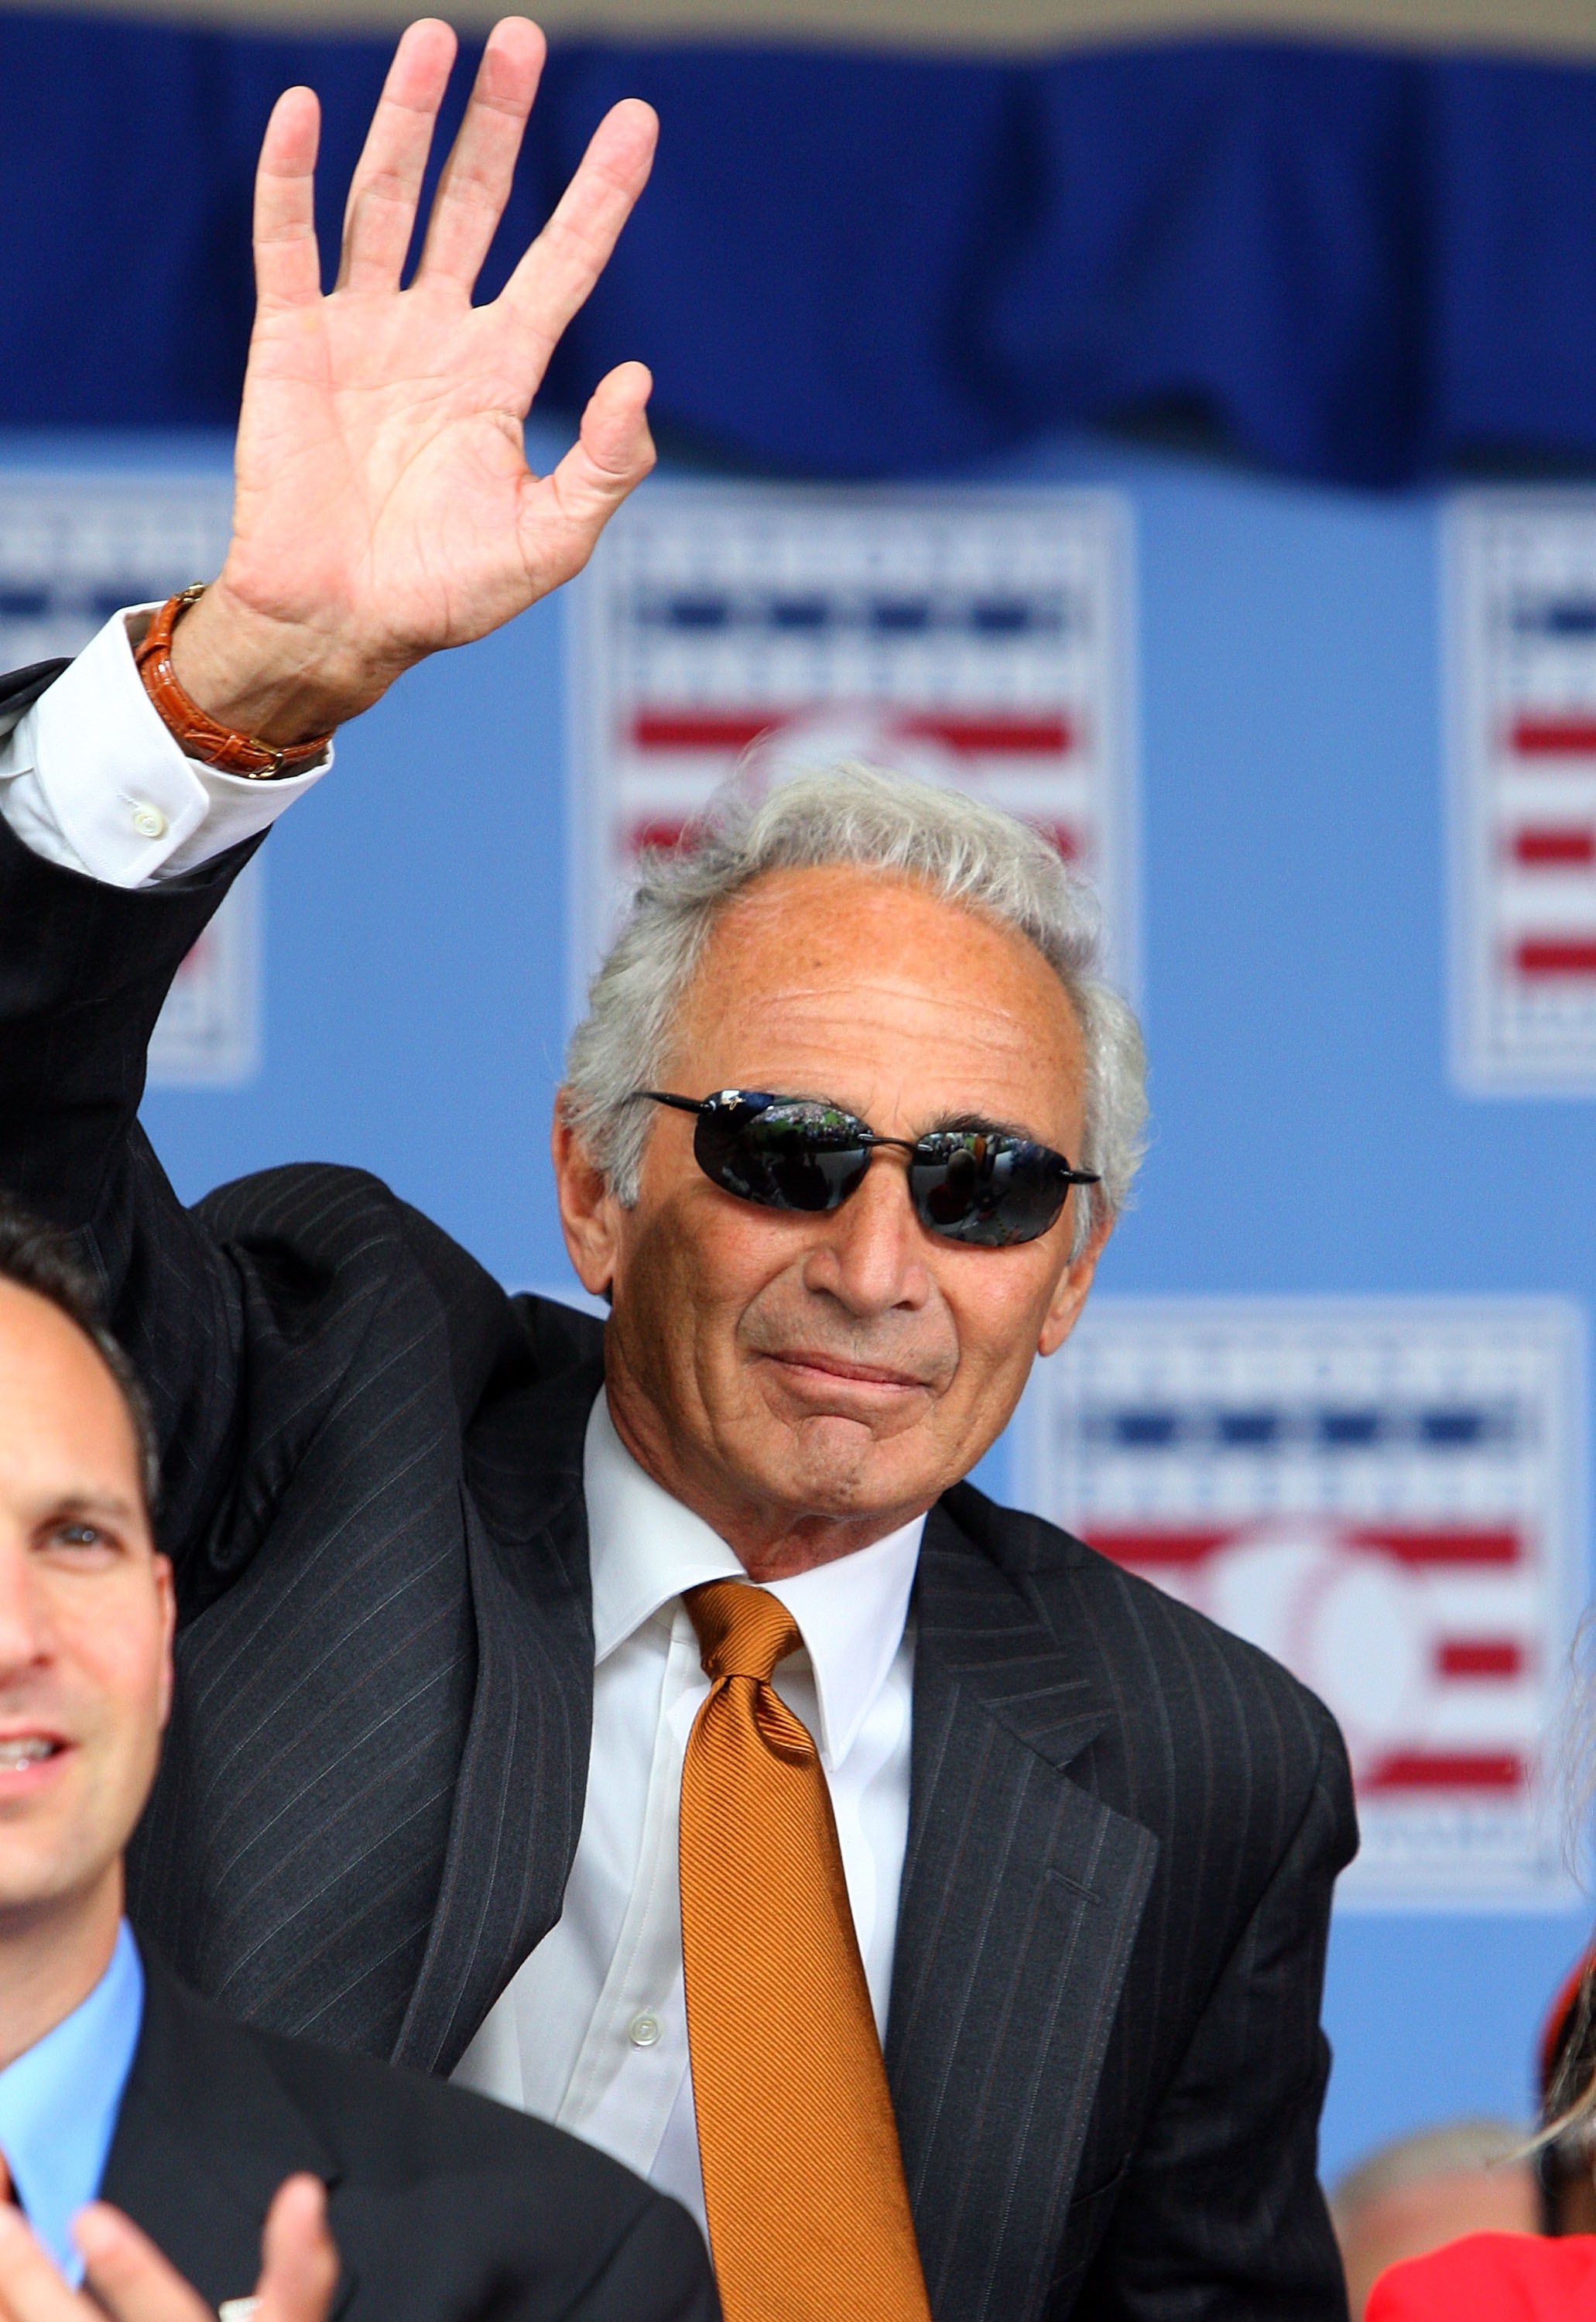 COOPERSTOWN, NY - JULY 26:  Hall of Famer Sandy Koufax waves to the crowd as he is introduced at Clark Sports Center during the 2009  Baseball Hall of Fame induction ceremony on July 26, 2009 in Cooperstown, New York.  (Photo by Jim McIsaac/Getty Images)